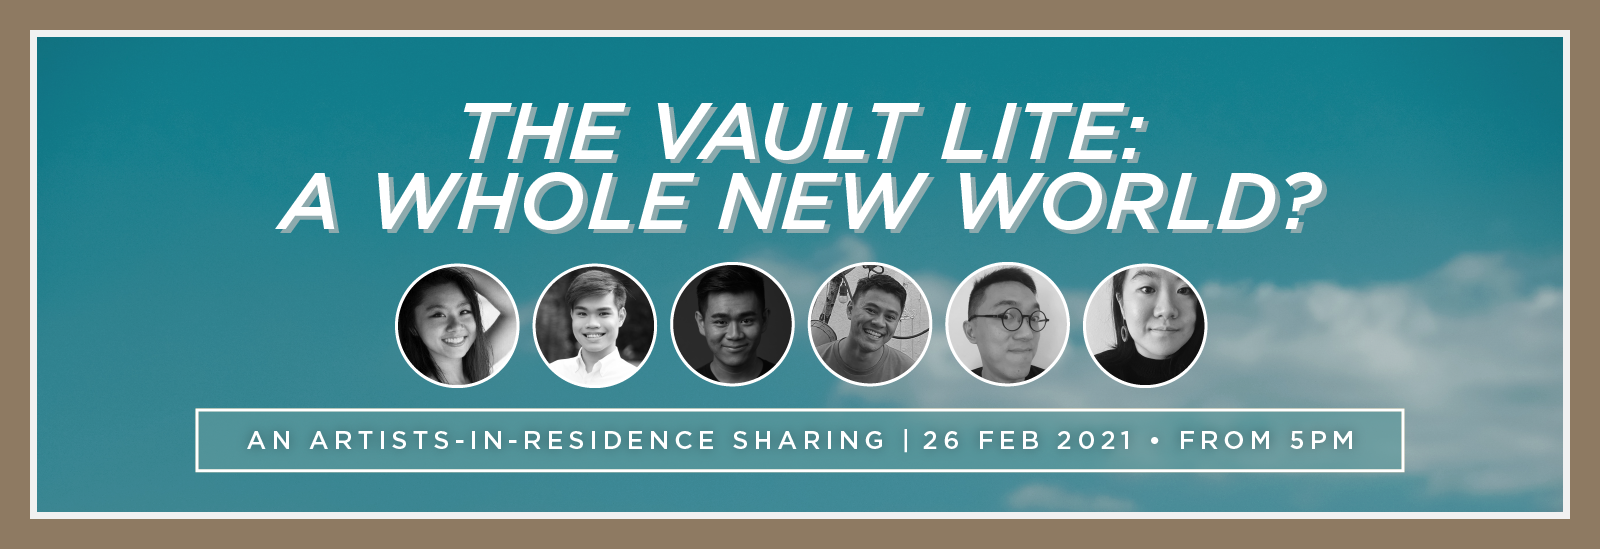 A blue banner with clouds and the header "The Vault Lite: A Whole New World?", with six portraits of artists in black and while, and a subtitle: An artists-in-residence sharing on 26 February 2021, from 5pm